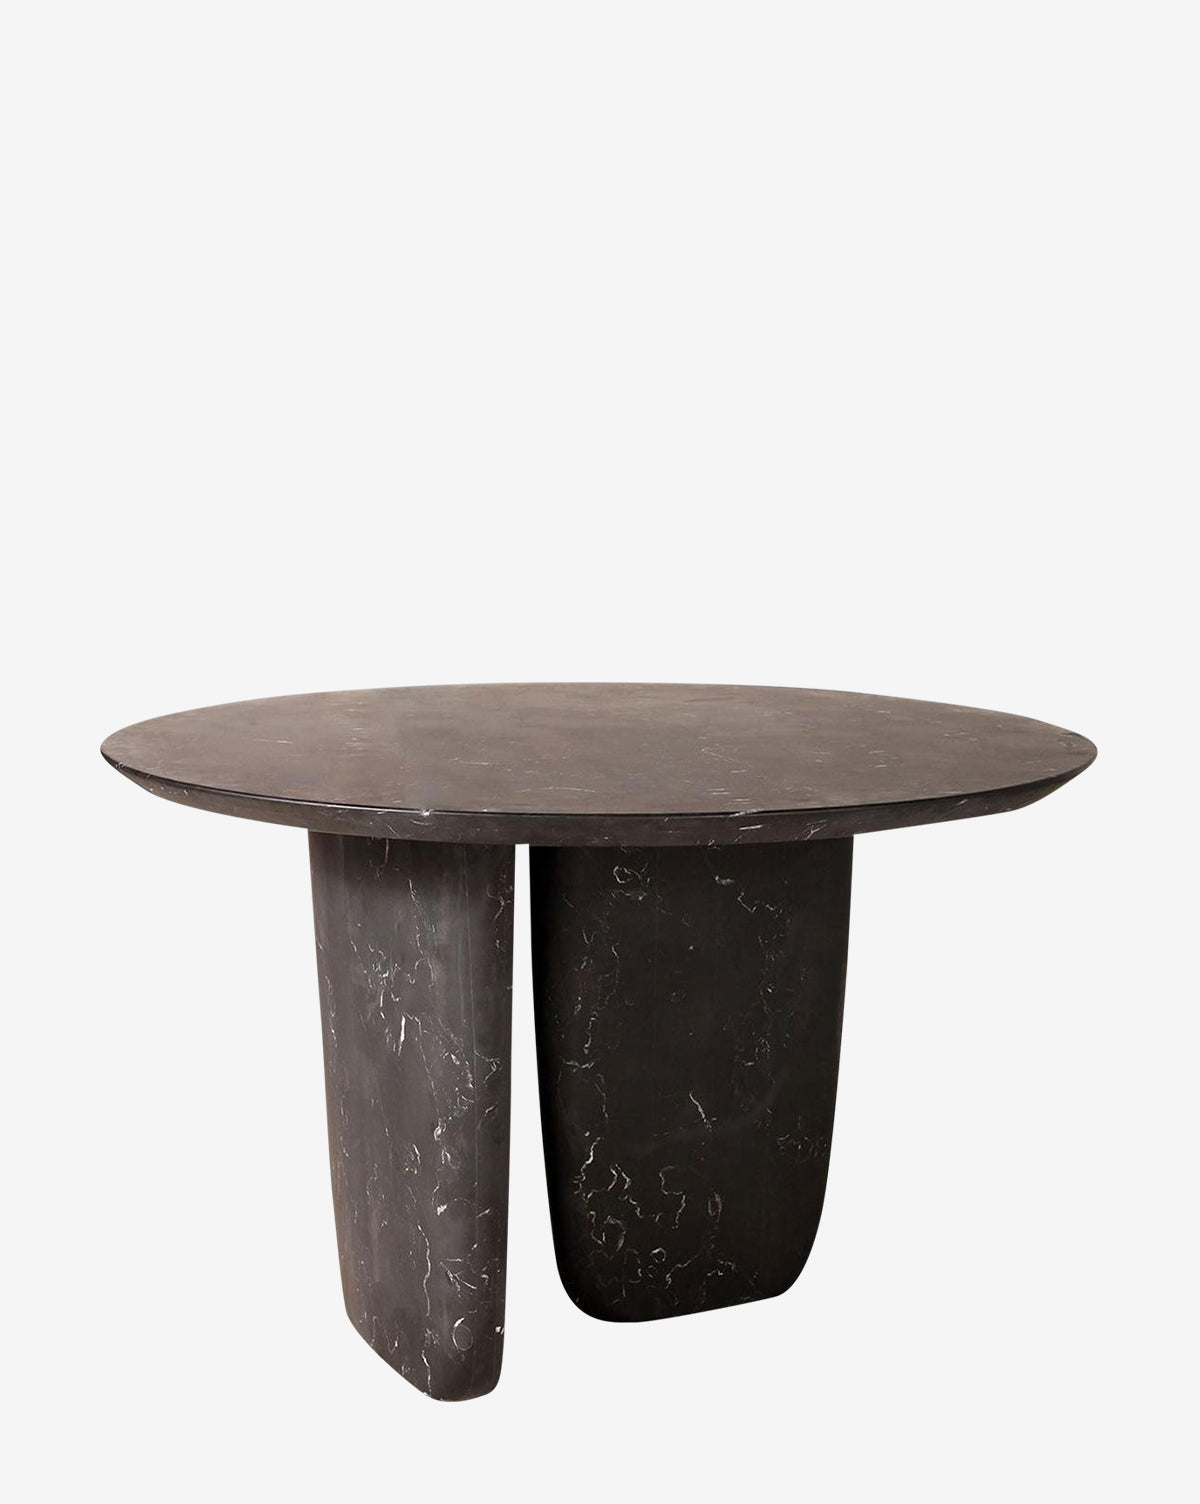 Bobo Intriguing Objects, Rustin Dining Table